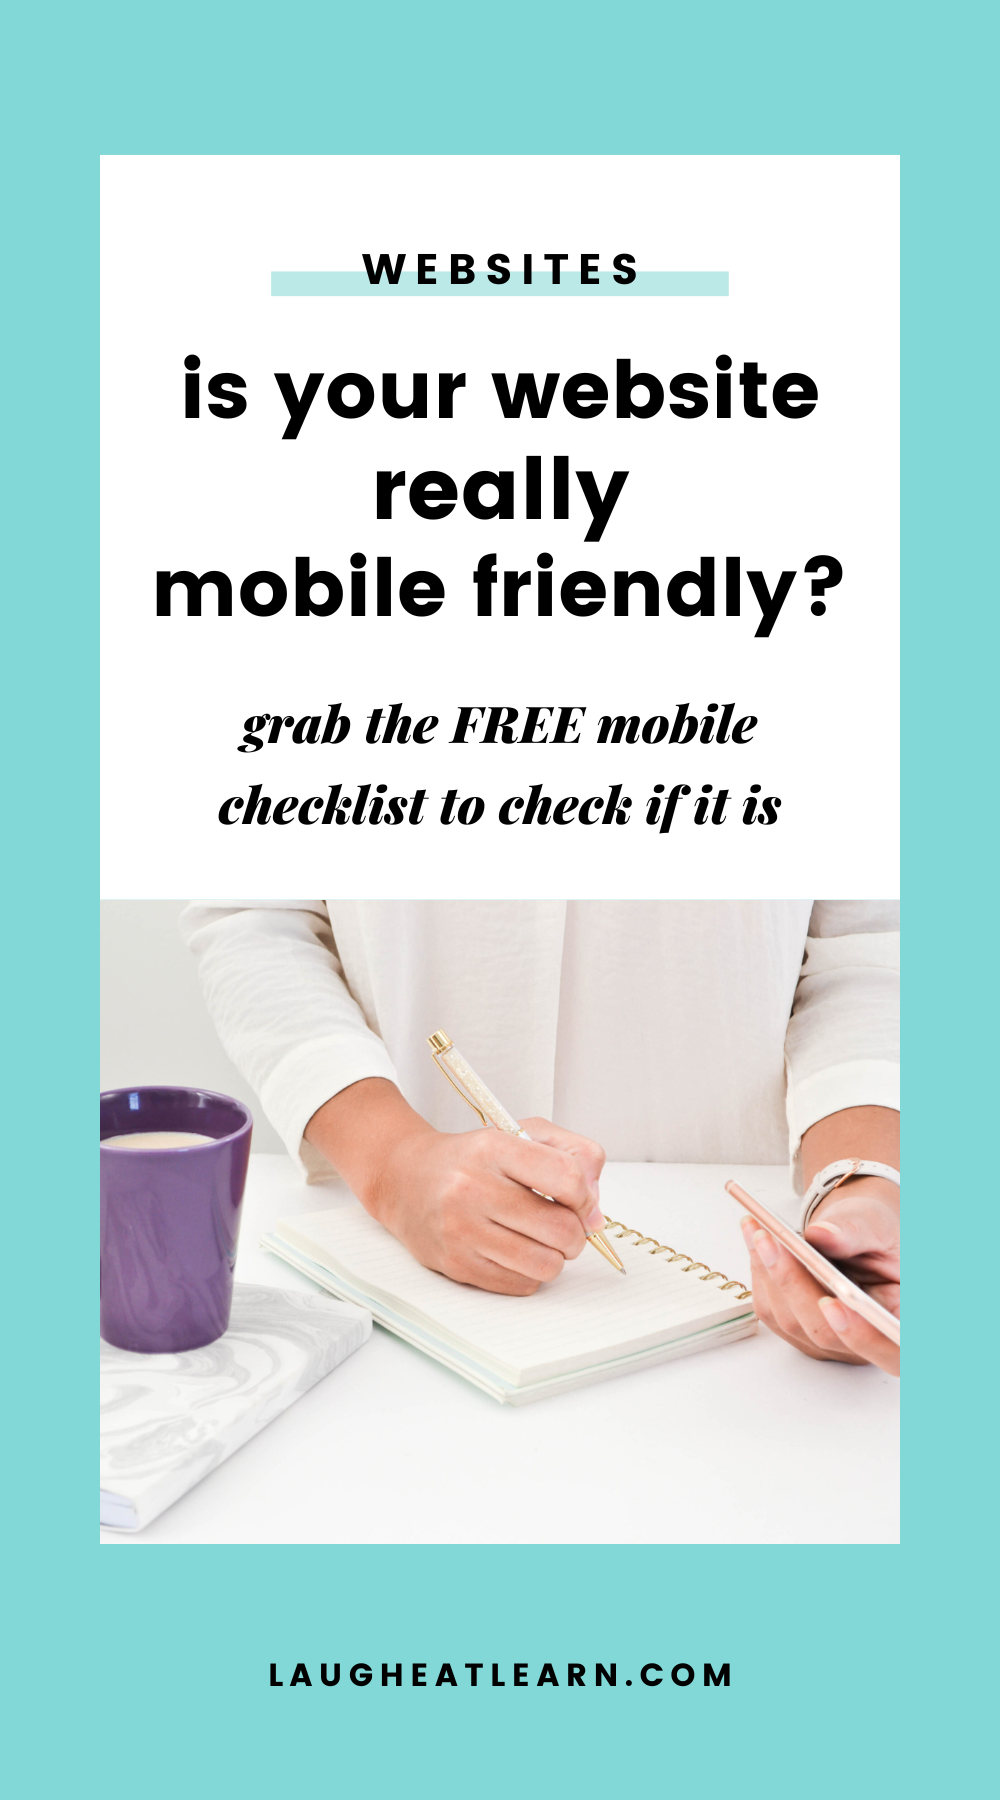 You know you need it...but what exactly is a mobile friendly website? Here's what you need and why it is important - plus a free checklist!